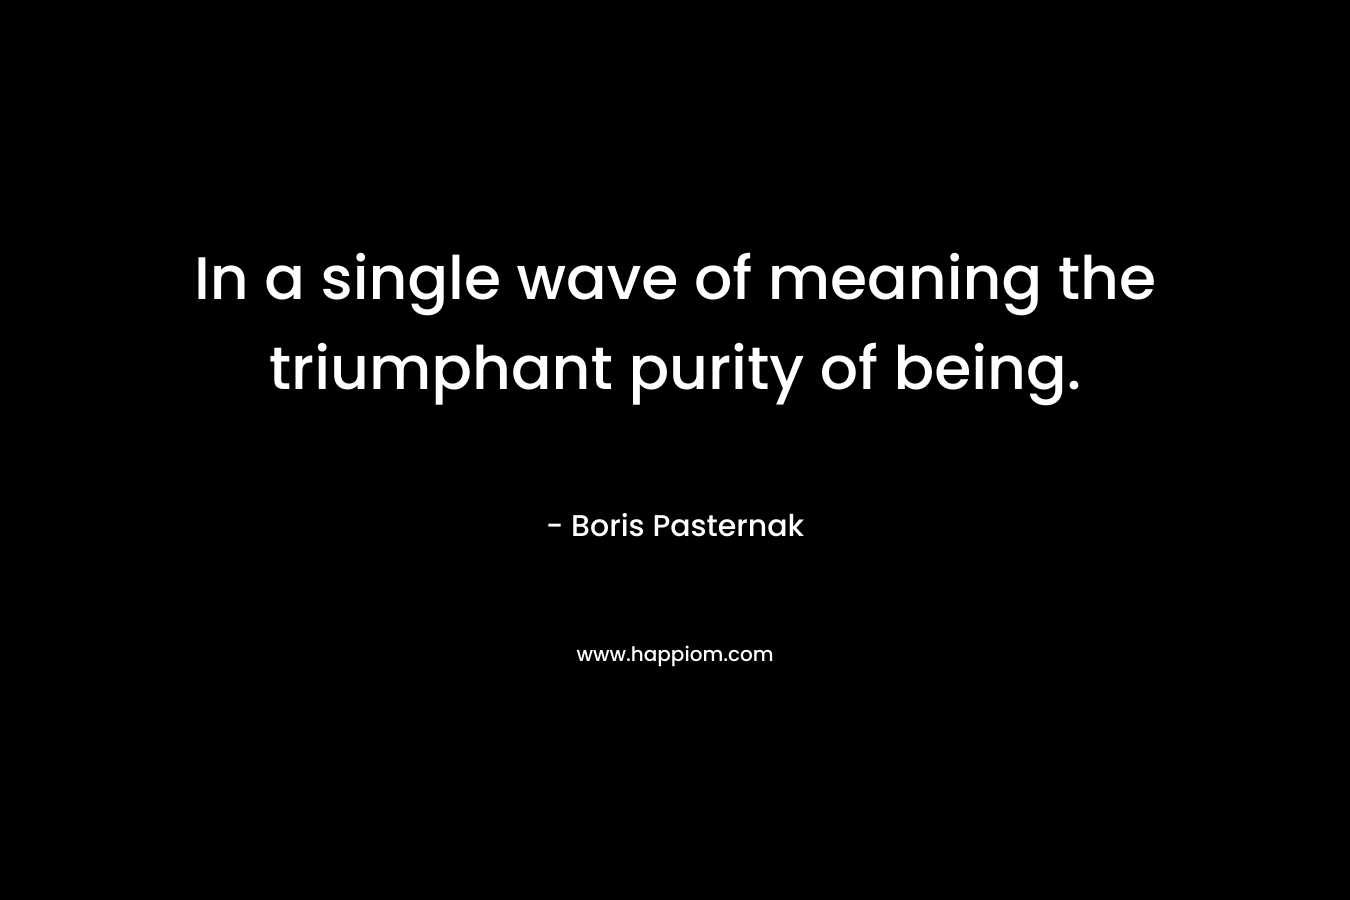 In a single wave of meaning the triumphant purity of being. – Boris Pasternak